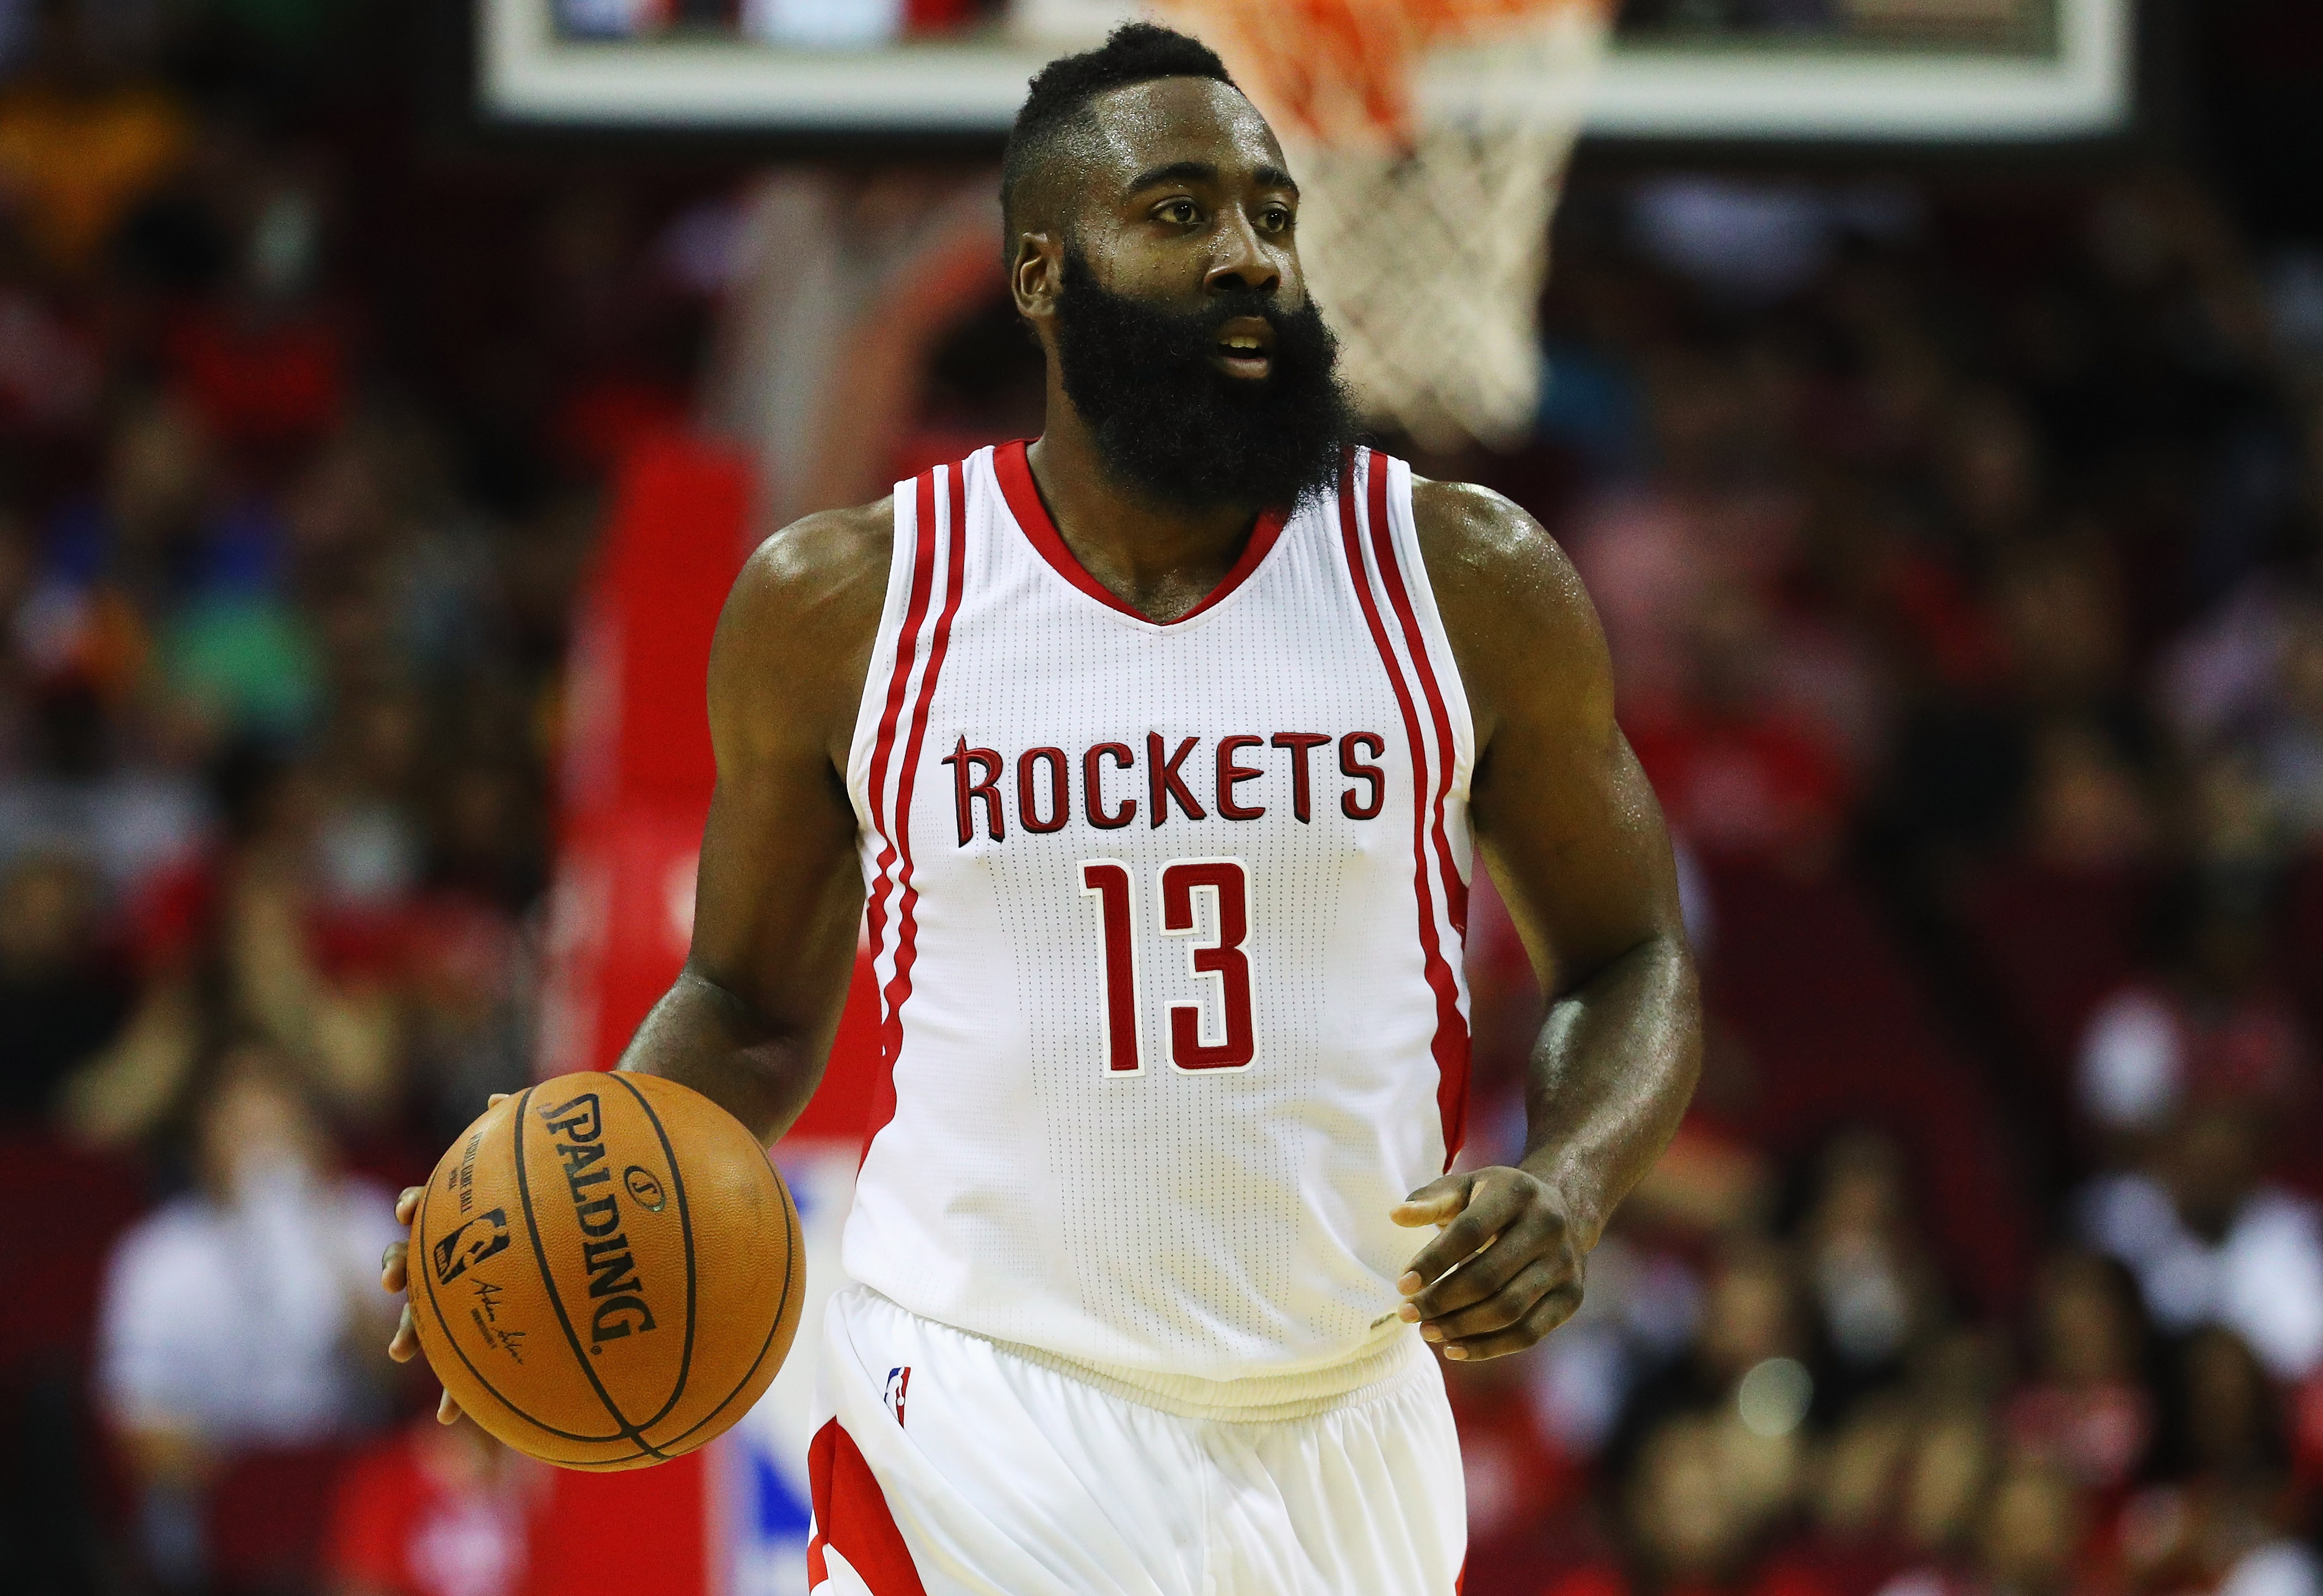 HOUSTON, TX - OCTOBER 04: James Harden #13 of the Houston Rockets in action during their game against the New York Knicks at the Toyota Center on October 4, 2016 in Houston, Texas. NOTE TO USER: User expressly acknowledges and agrees that, by downloading and or using this Photograph, user is consenting to the terms and conditions of the Getty Images License Agreement.   Scott Halleran/Getty Images/AFP